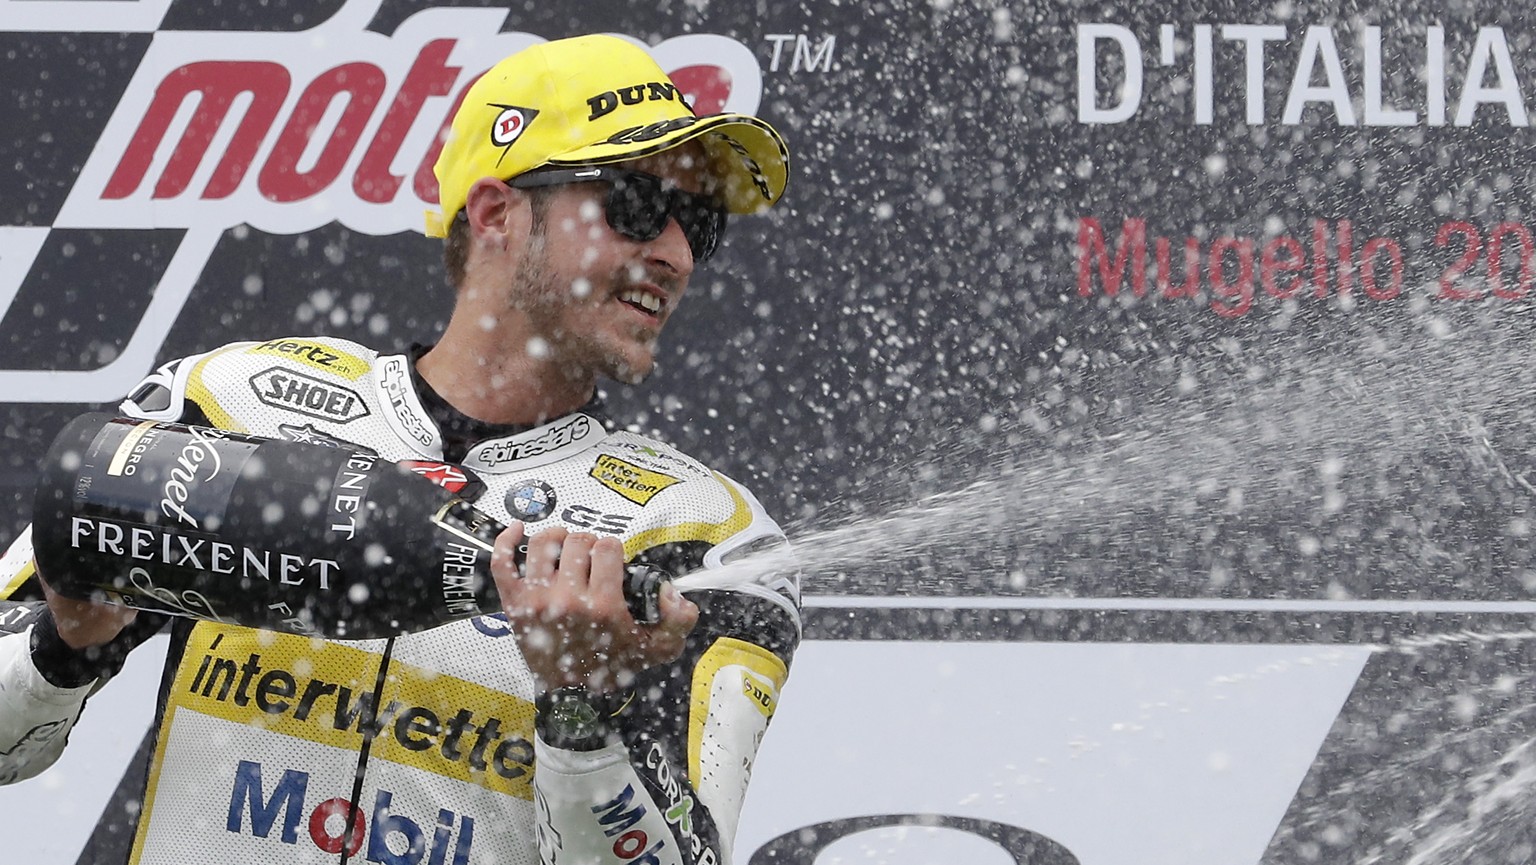 Kalex rider Thomas Luthi, of Switzerland, celebrates on the podium after taking the second place in the Italian Moto 2 grand prix at the Mugello circuit, in Scarperia, Italy, Sunday, June 4, 2017. (AP ...